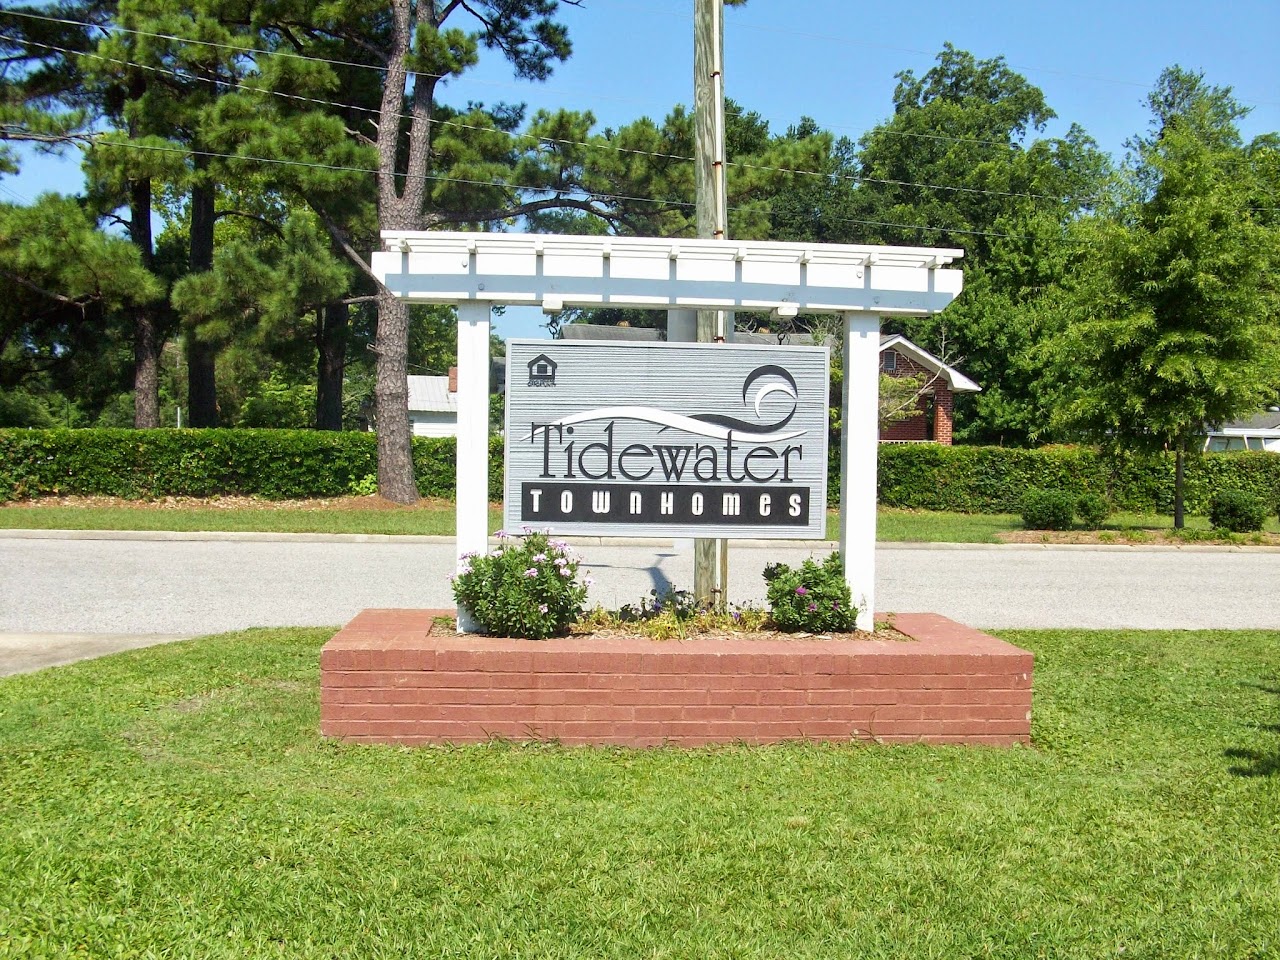 Photo of TIDEWATER TOWN HOMES. Affordable housing located at 314 GREENDALE DRIVE WILMINGTON, NC 28405